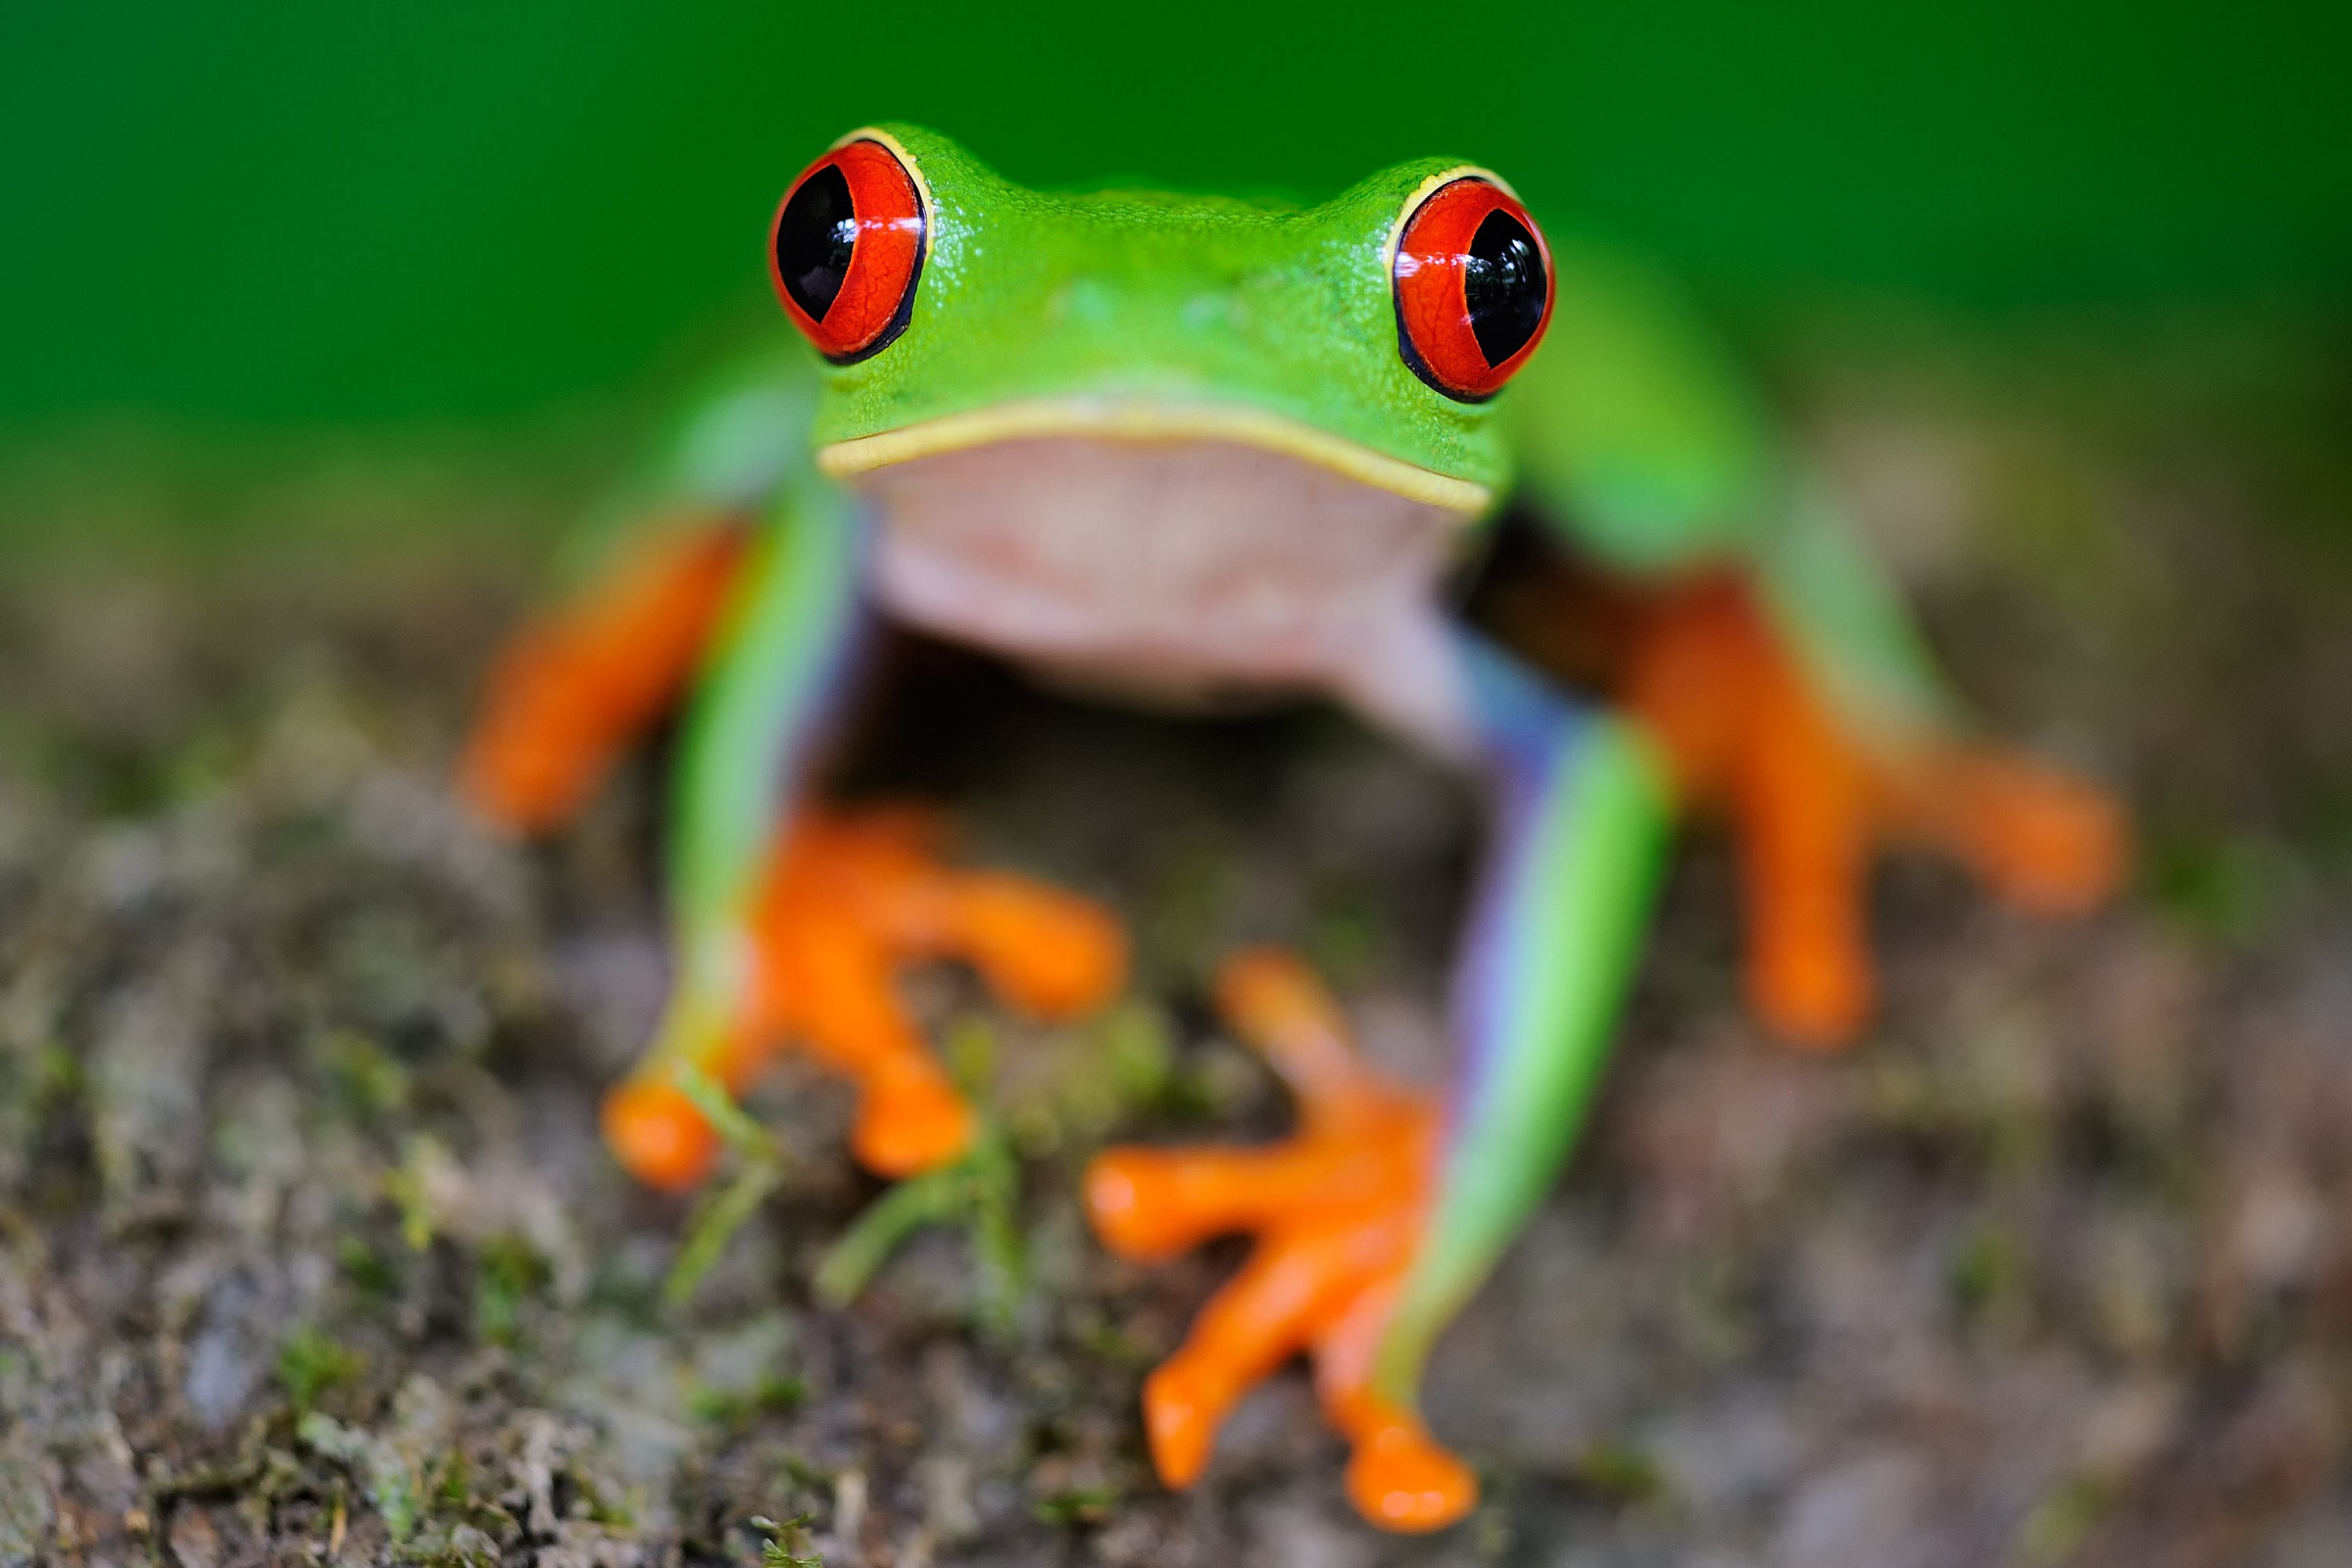 What are you looking at? (Frog with red eyes)...